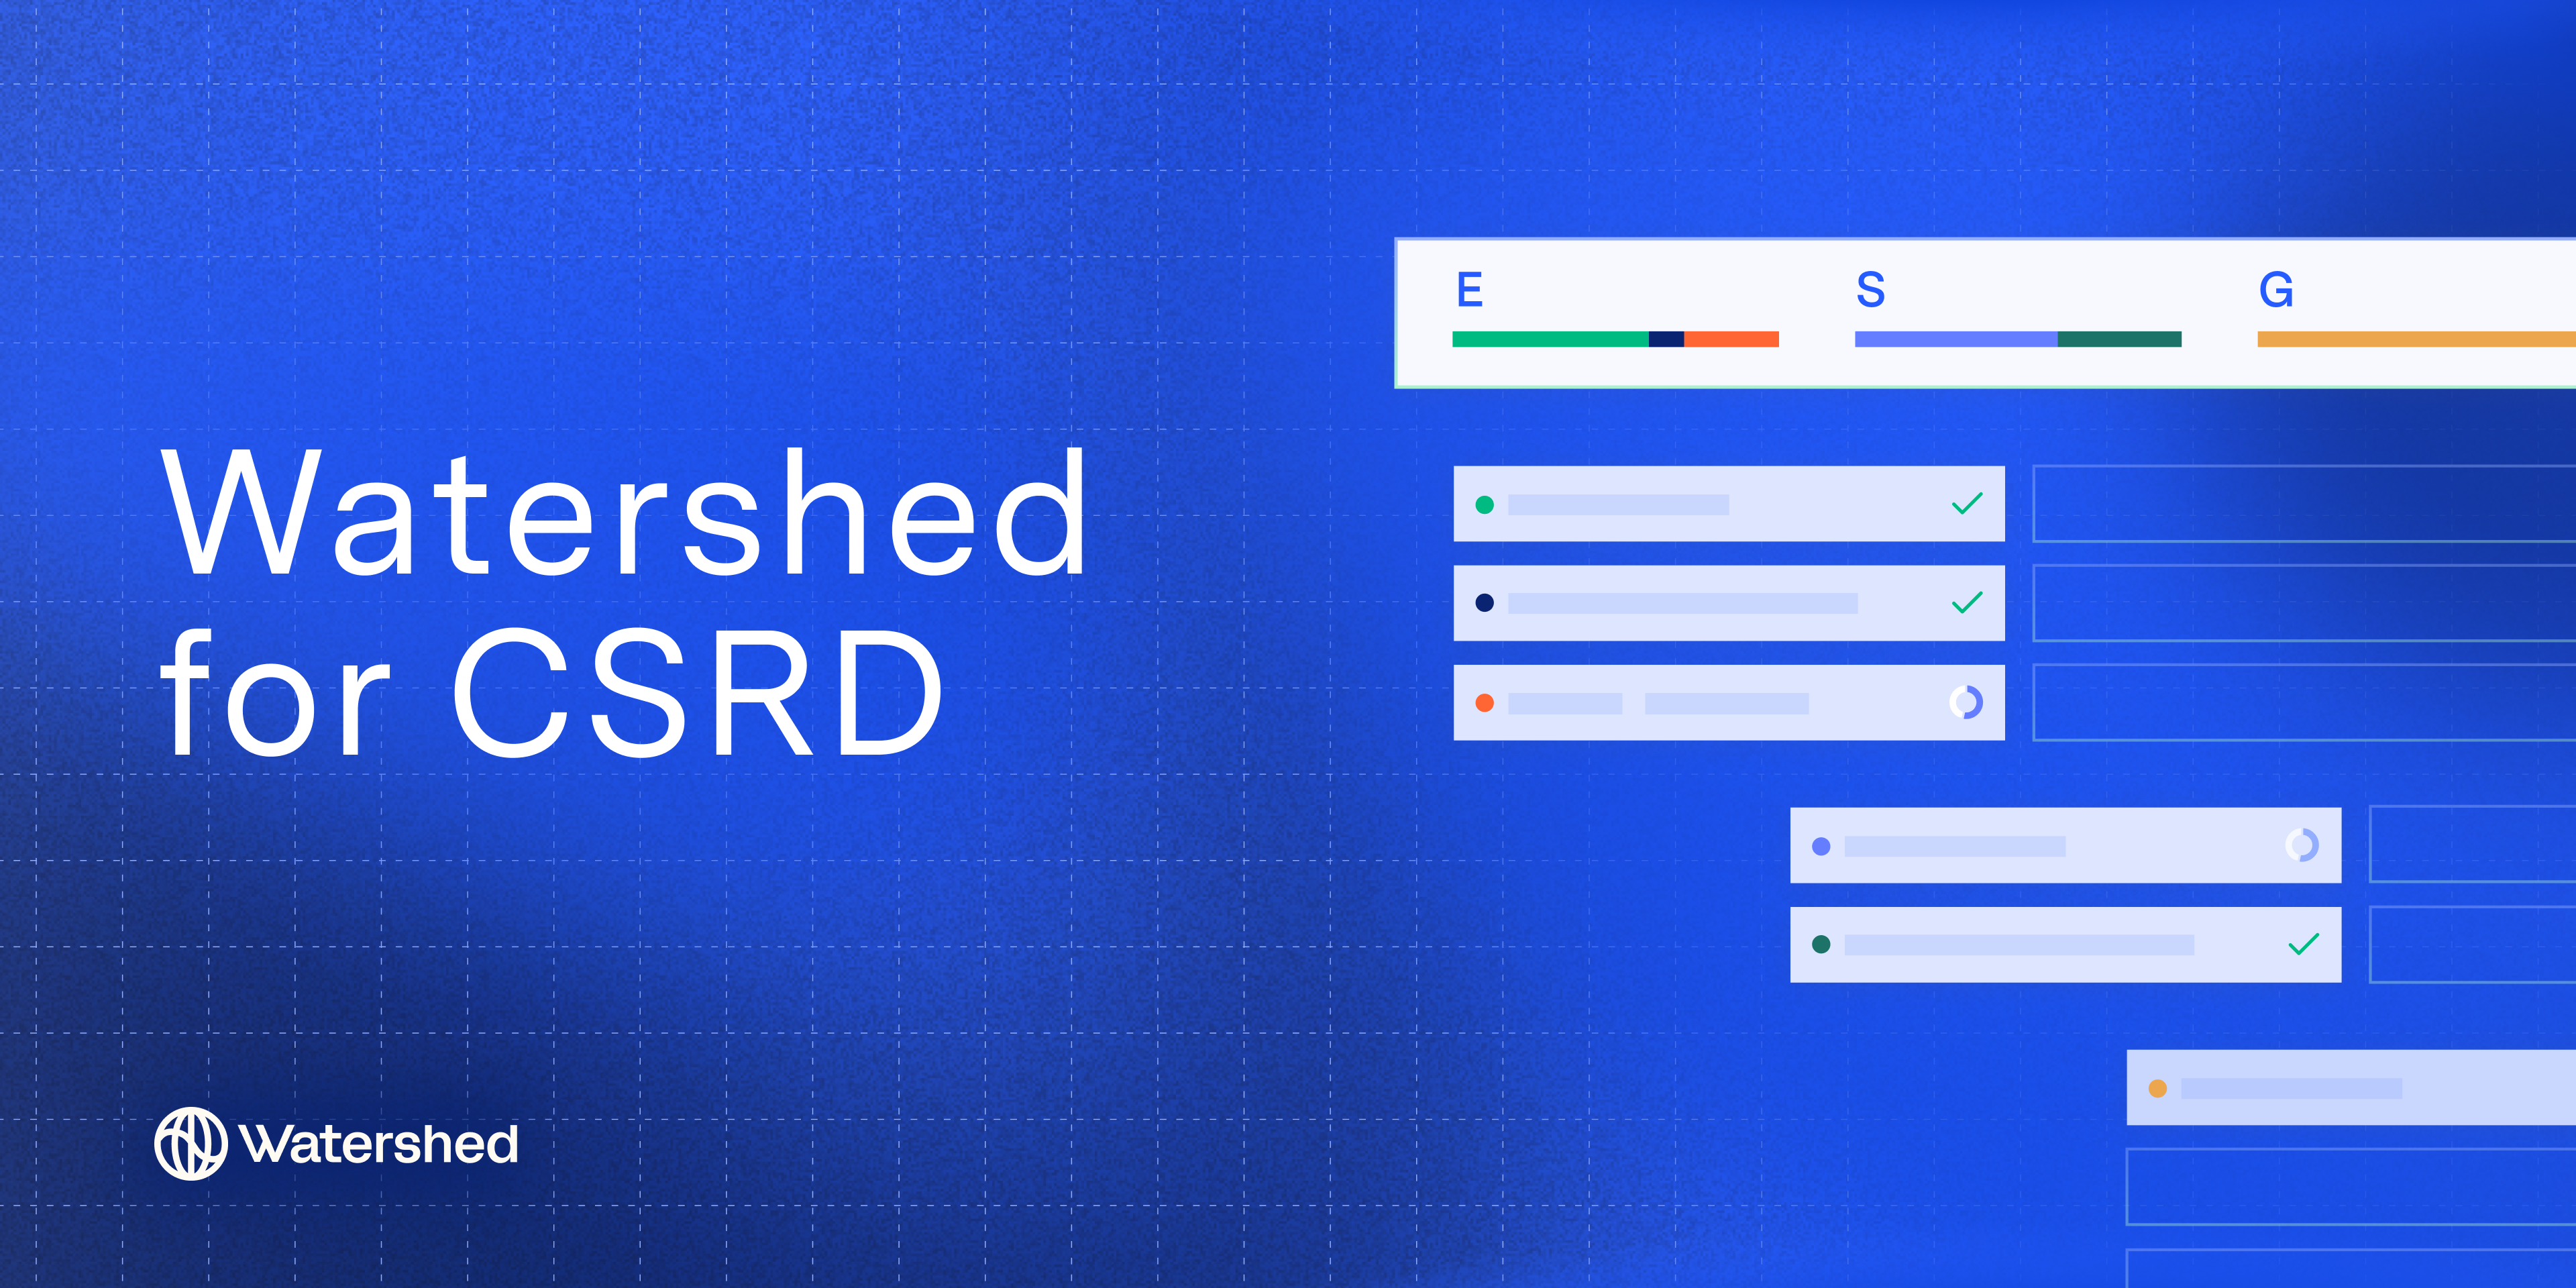 watershed for CSRD